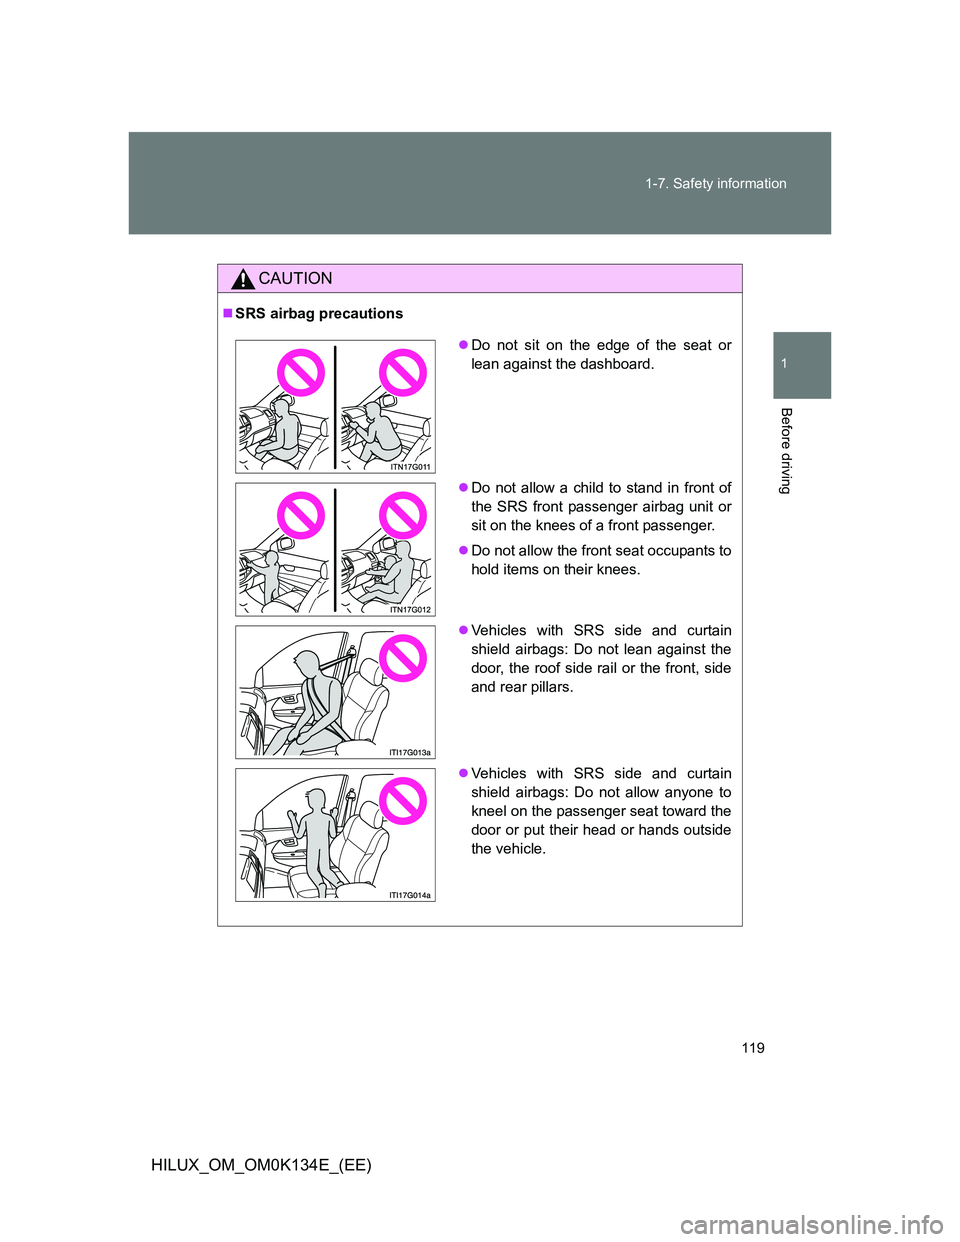 TOYOTA HILUX 2013  Owners Manual (in English) 119 1-7. Safety information
1
Before driving
HILUX_OM_OM0K134E_(EE)
CAUTION
SRS airbag precautions
Do not sit on the edge of the seat or
lean against the dashboard.
Do not allow a child to st